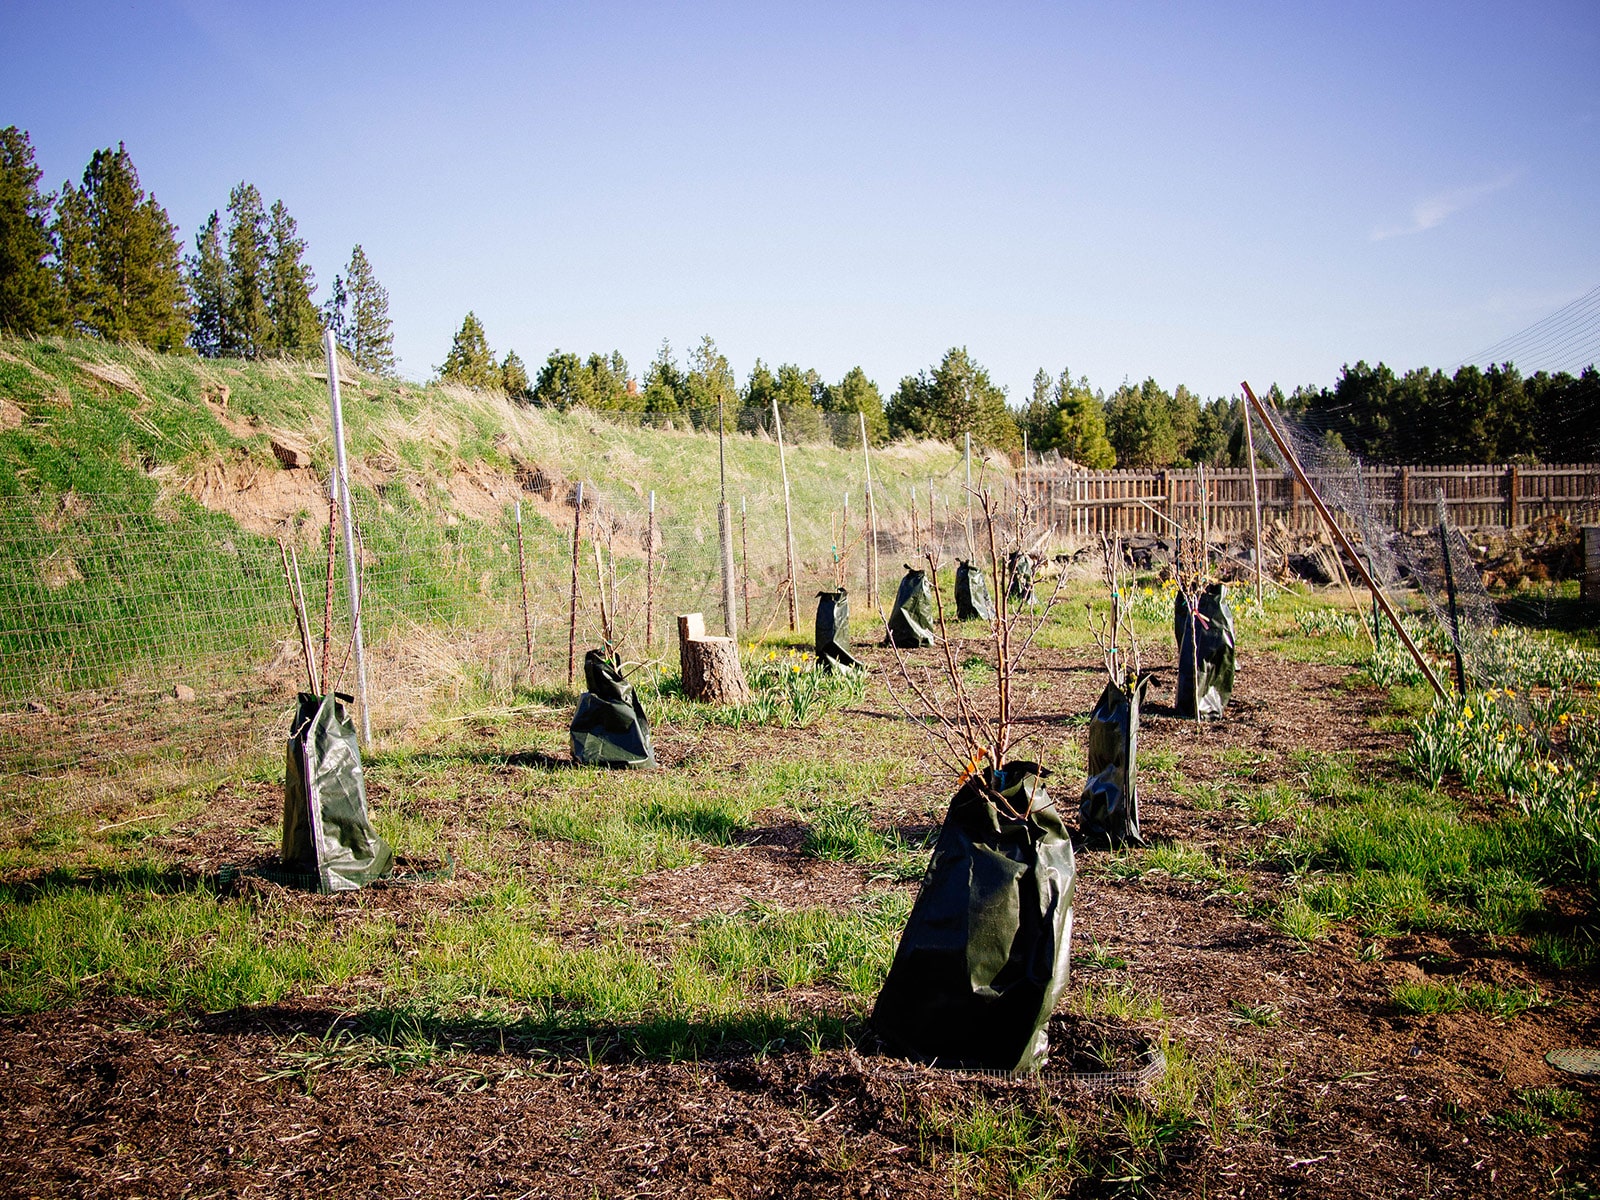 Newly planted trees in an orchard with watering bags around the trunks